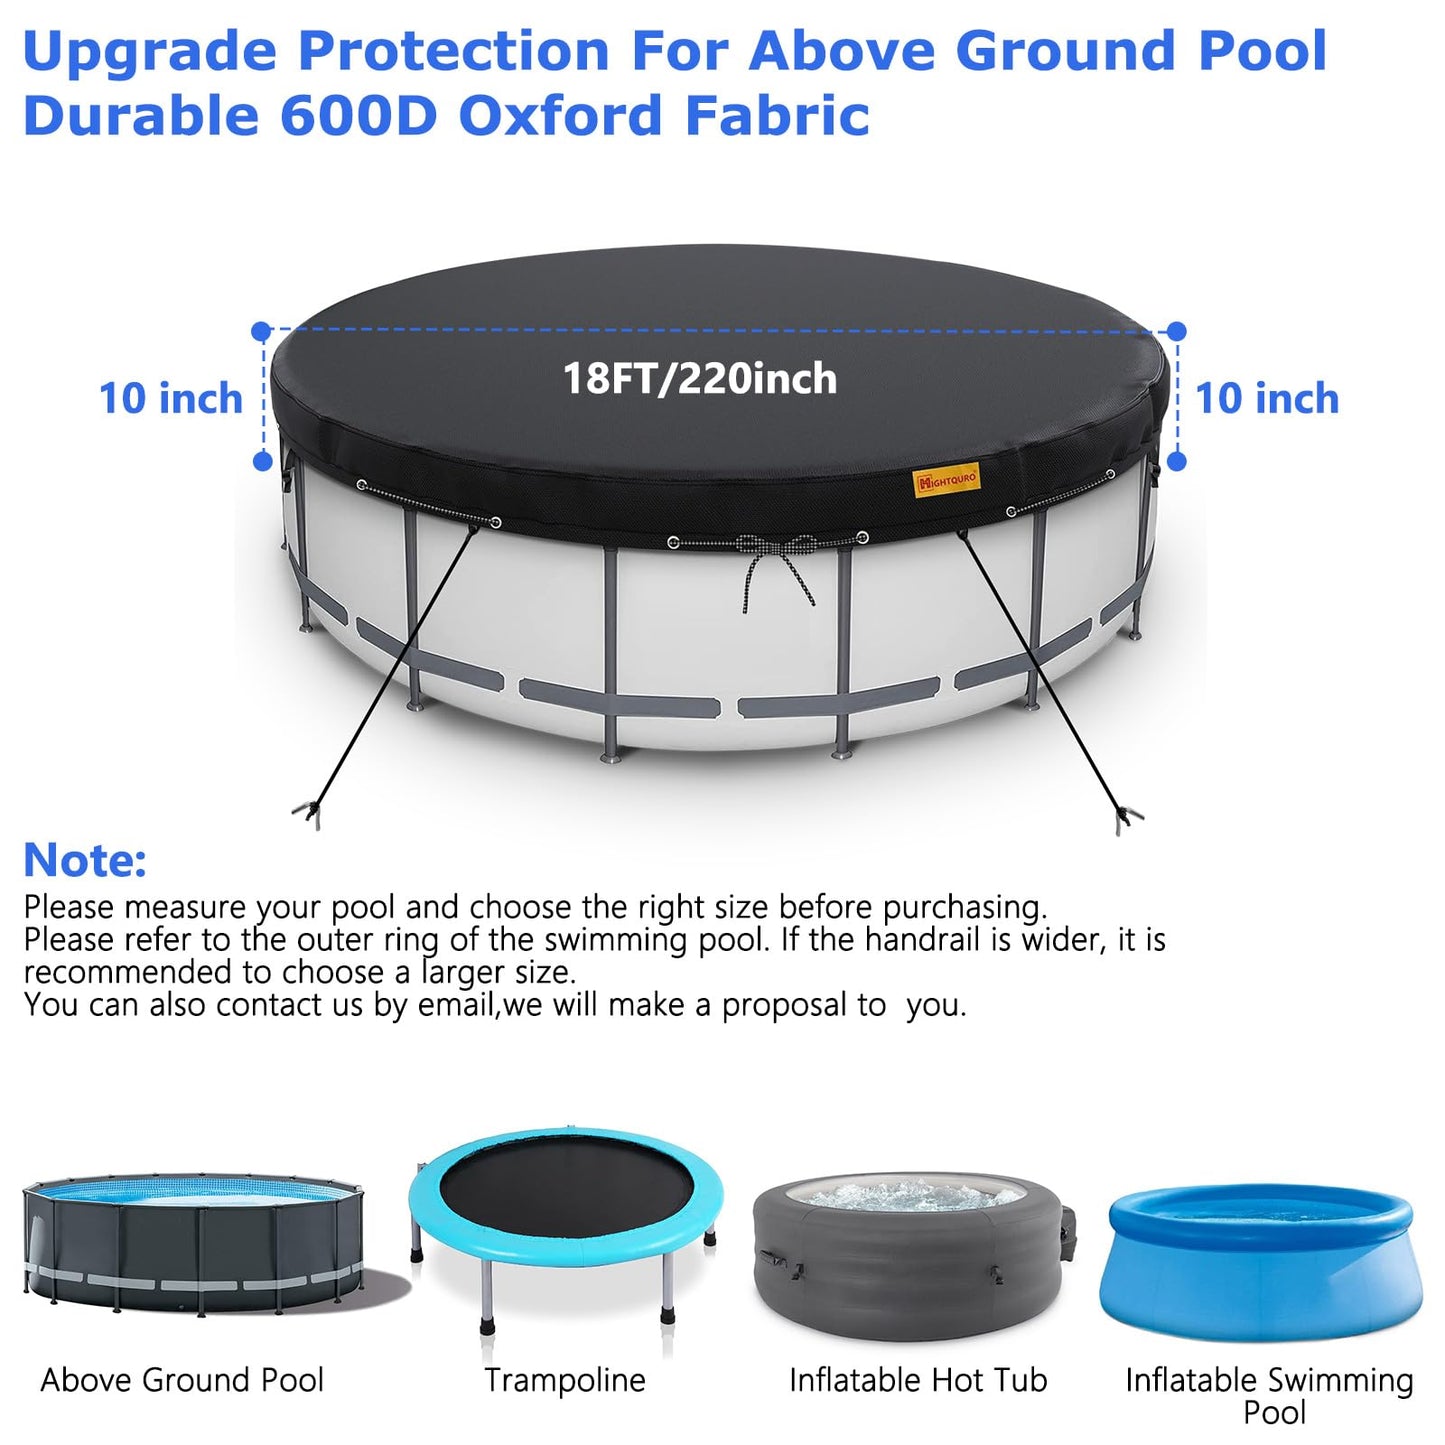 HIGHTQURO 18Ft Round Pool Cover, Inground Pool Covers for Above Ground Pools, Swimming Pool Cover Protector with Tie-Down Ropes & 4 Sandbags Increase Stability, Waterproof Dustproof Hot Tub Cover